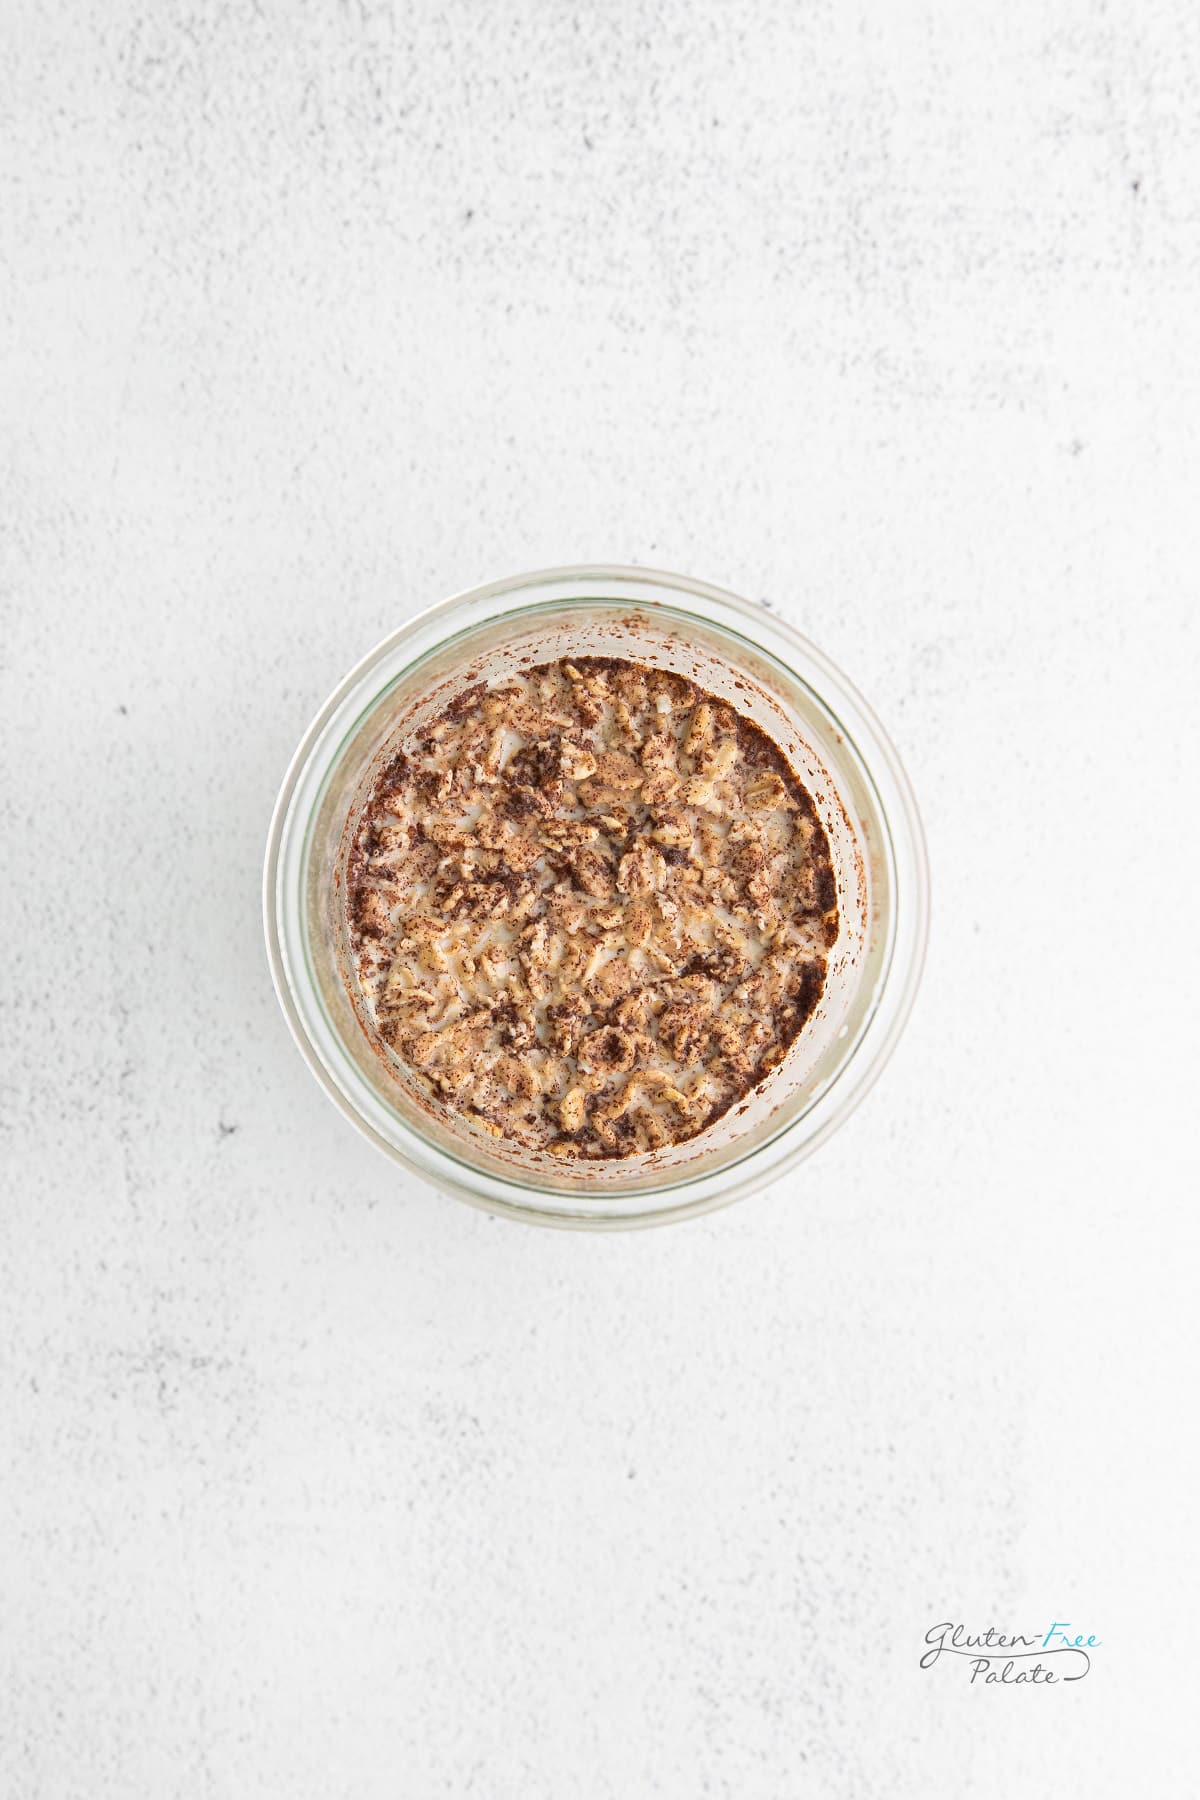 A jar of overnight oats, viewed from above.